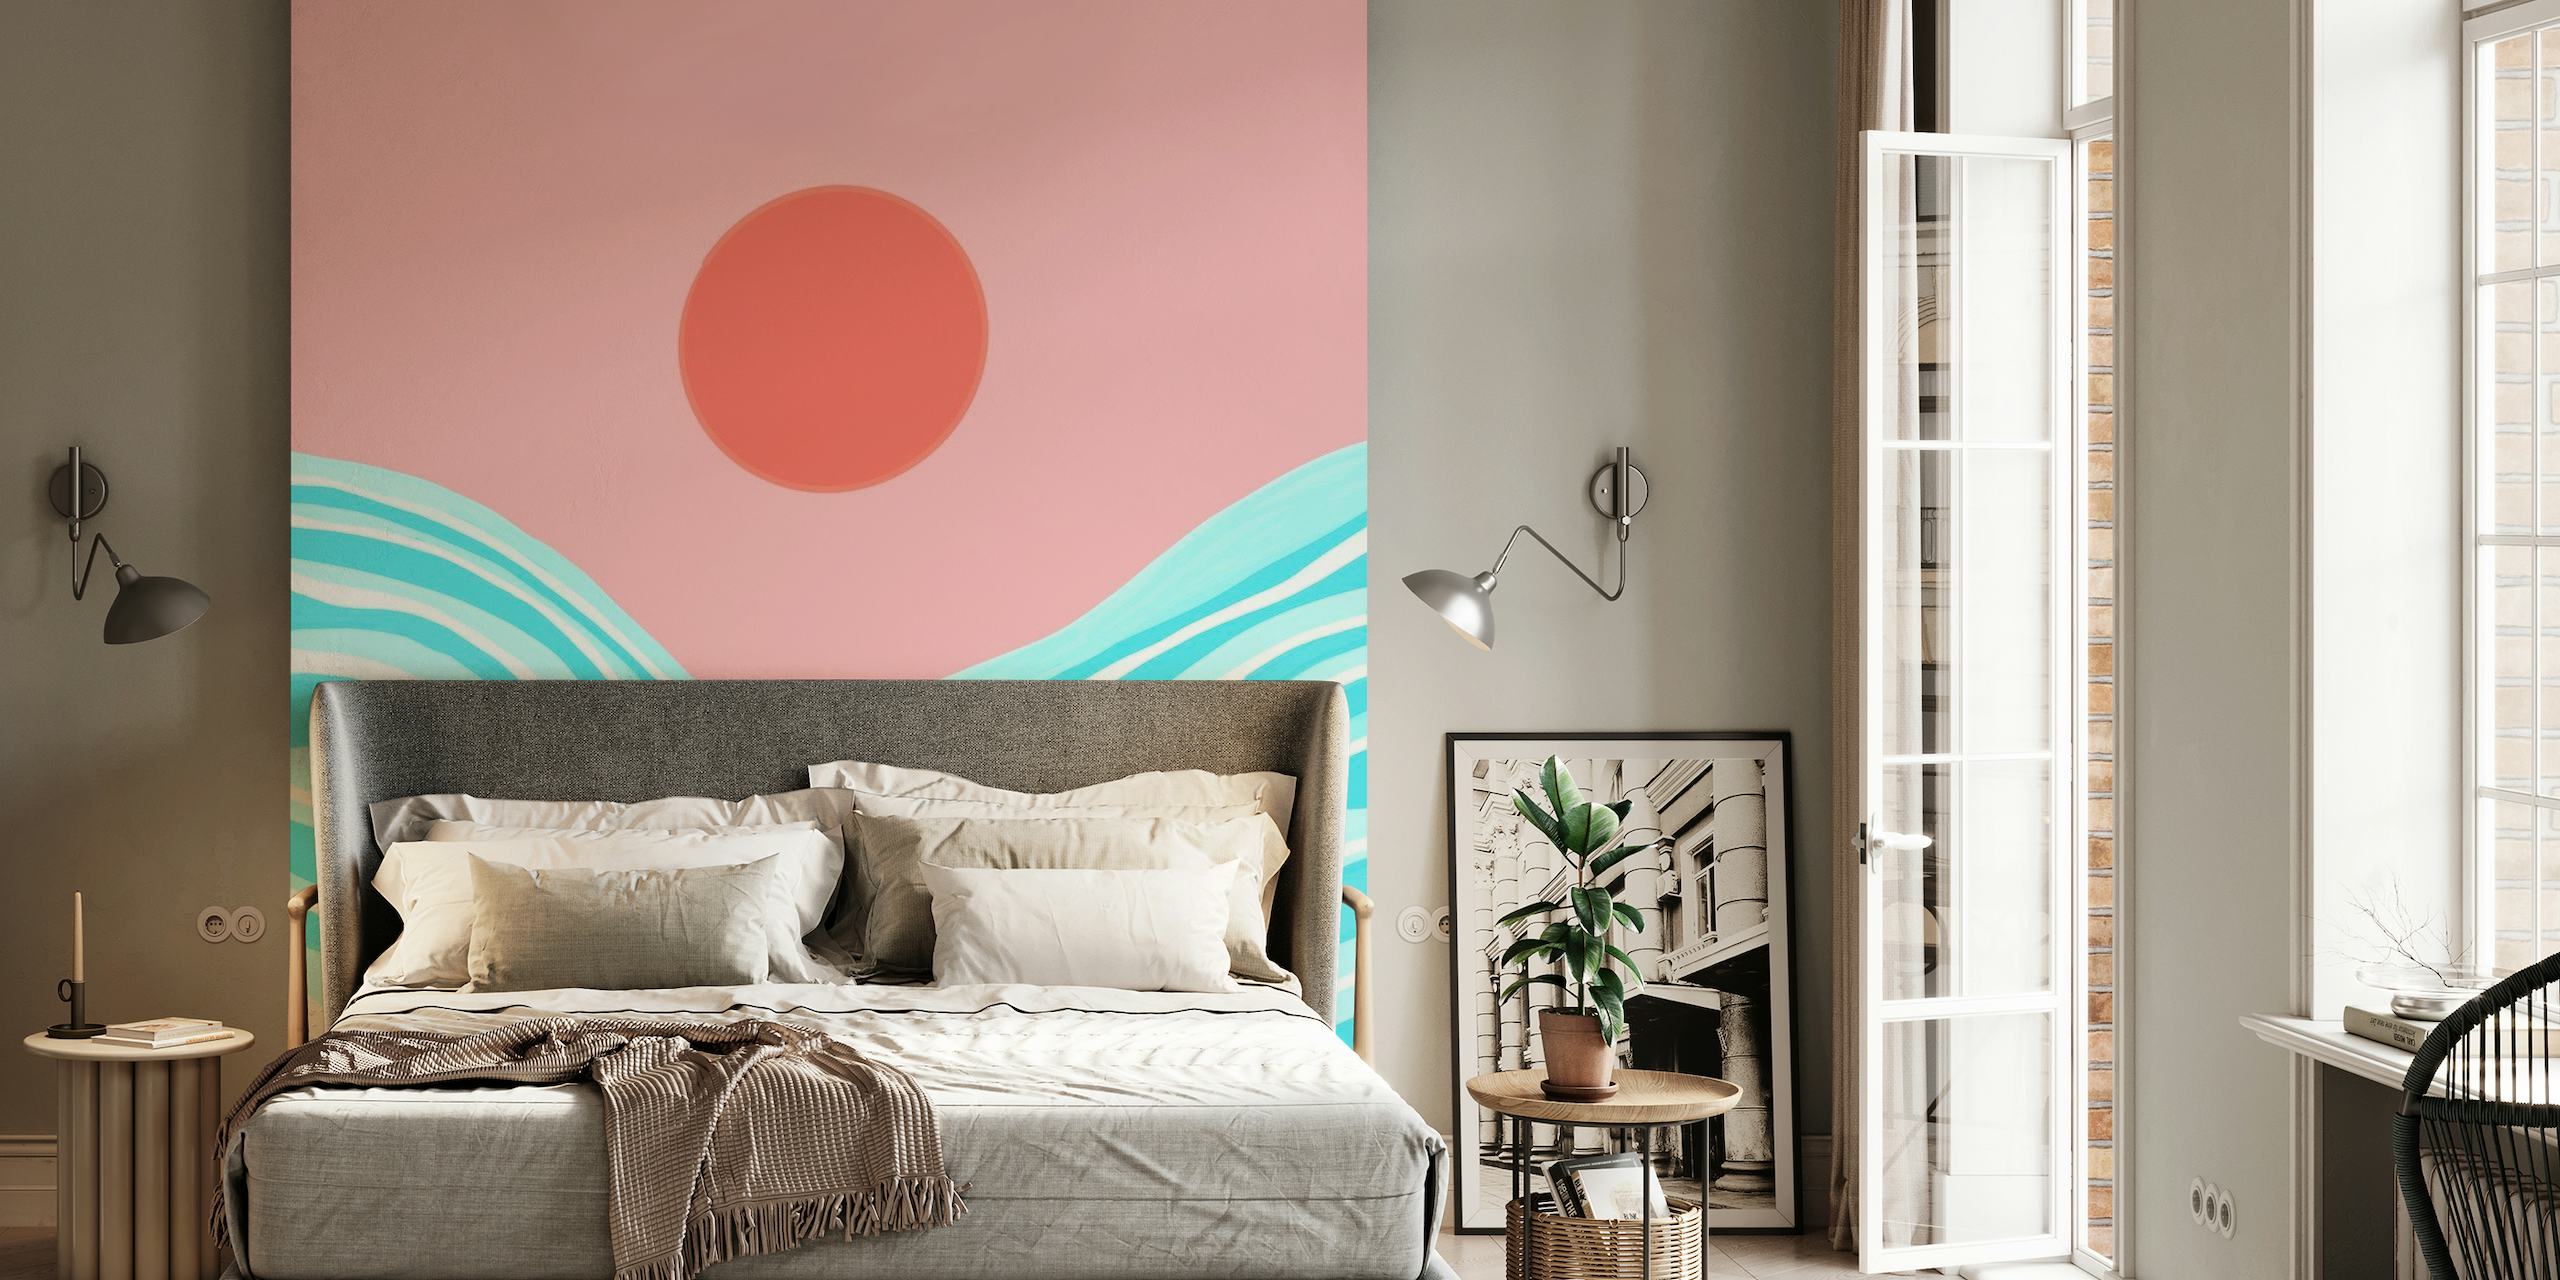 Abstract ocean waves in blue with a pink sky and minimalist sun wall mural